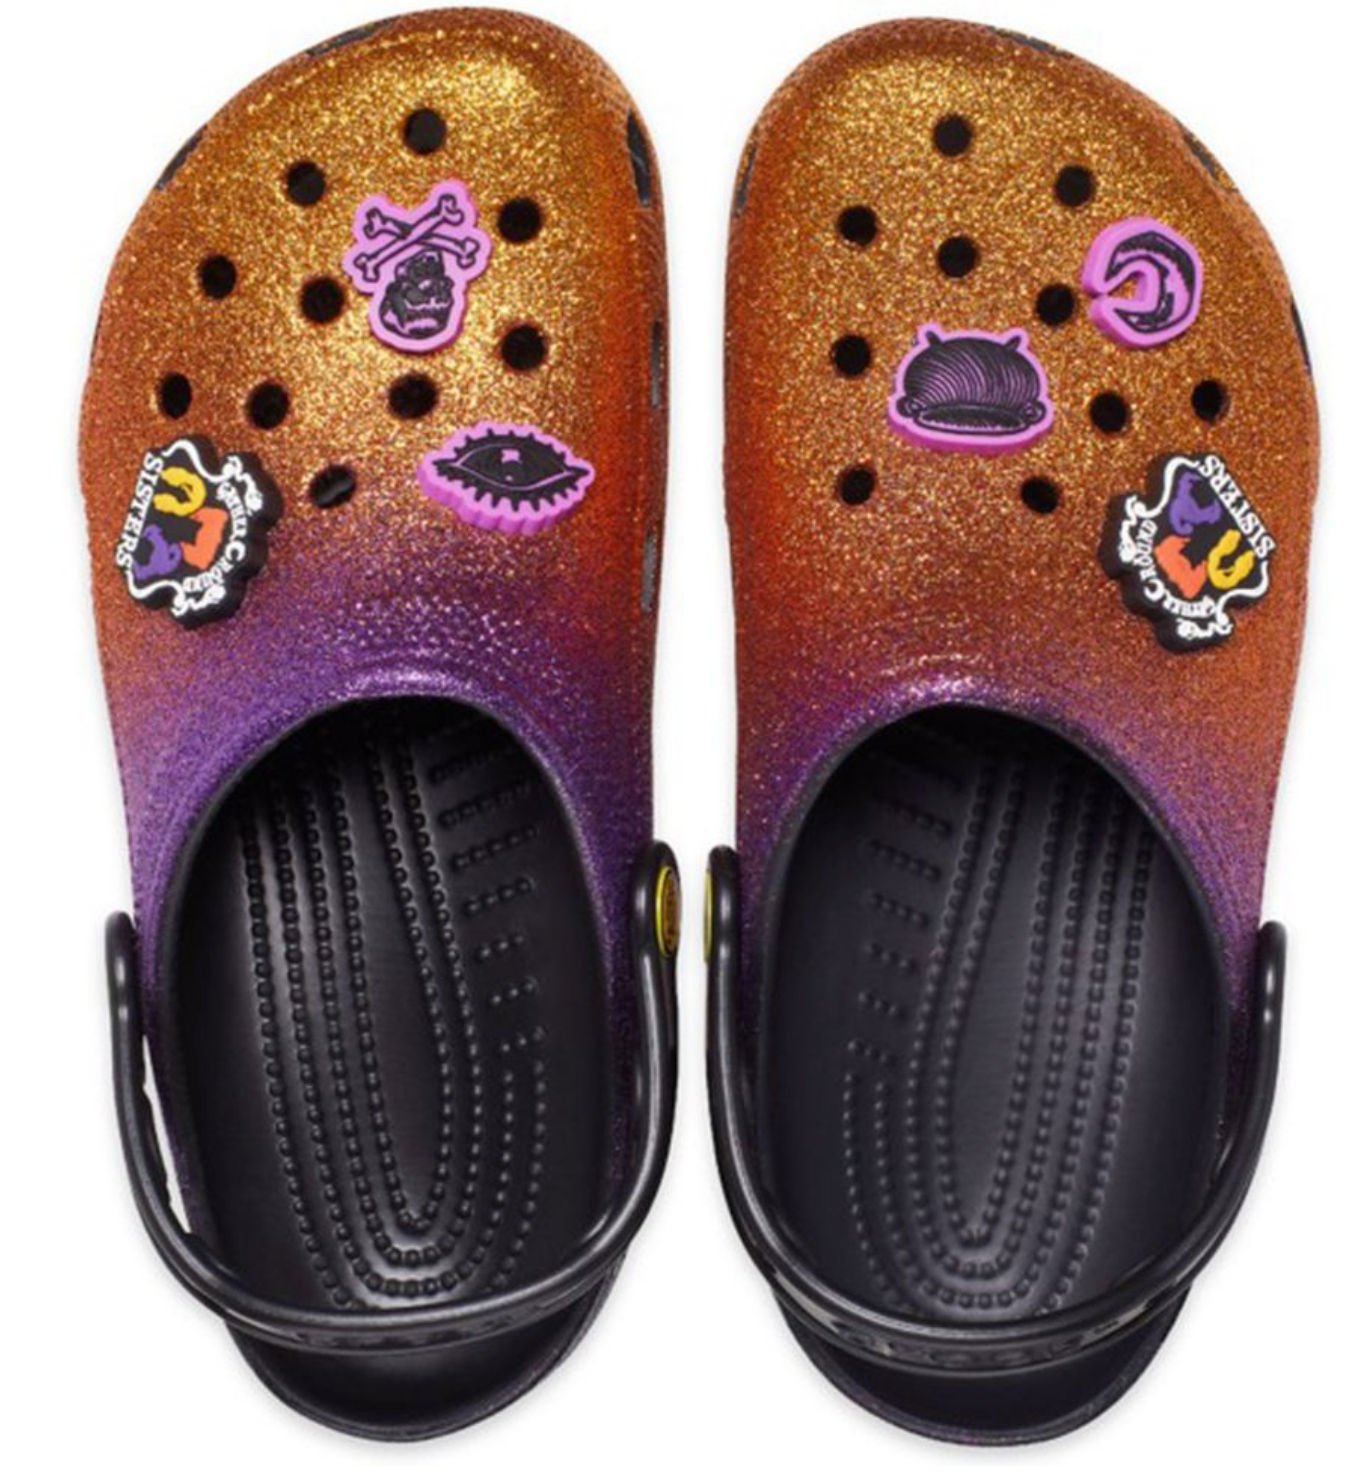 Disney Halloween Hocus Pocus Clogs for Adults by Crocs M8/W10 New